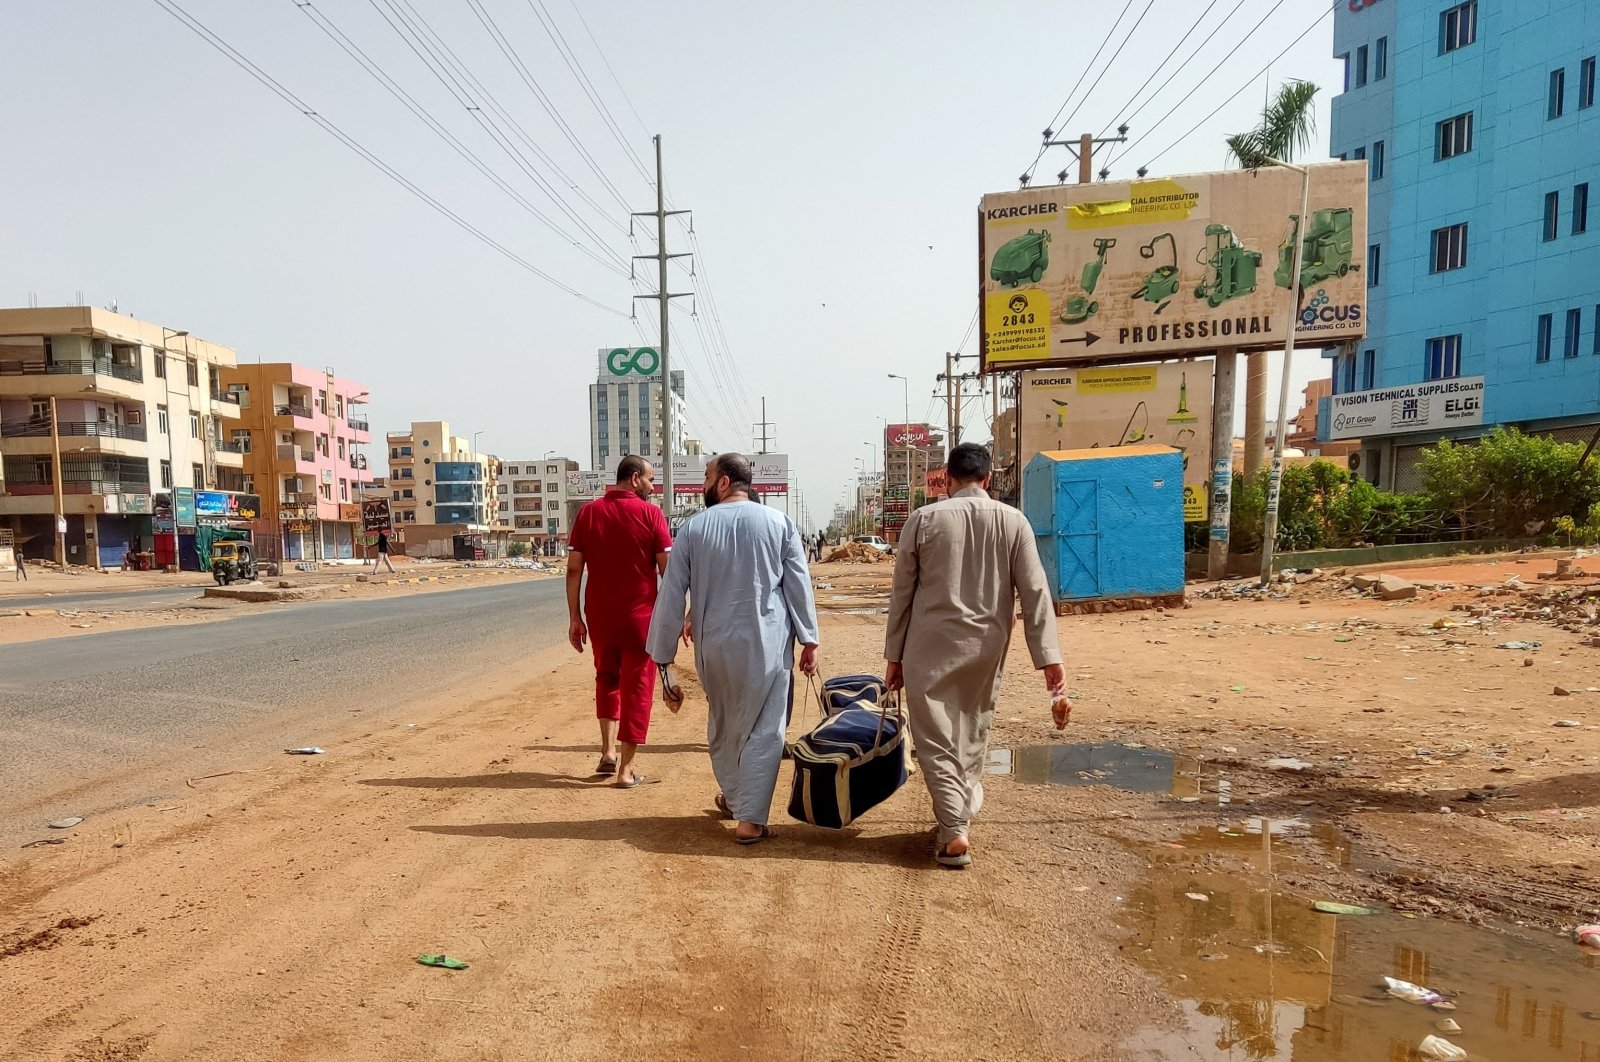 Sudanese people walk with their luggage in Khartoum, Sudan, June 5, 2023. (AFP Photo)